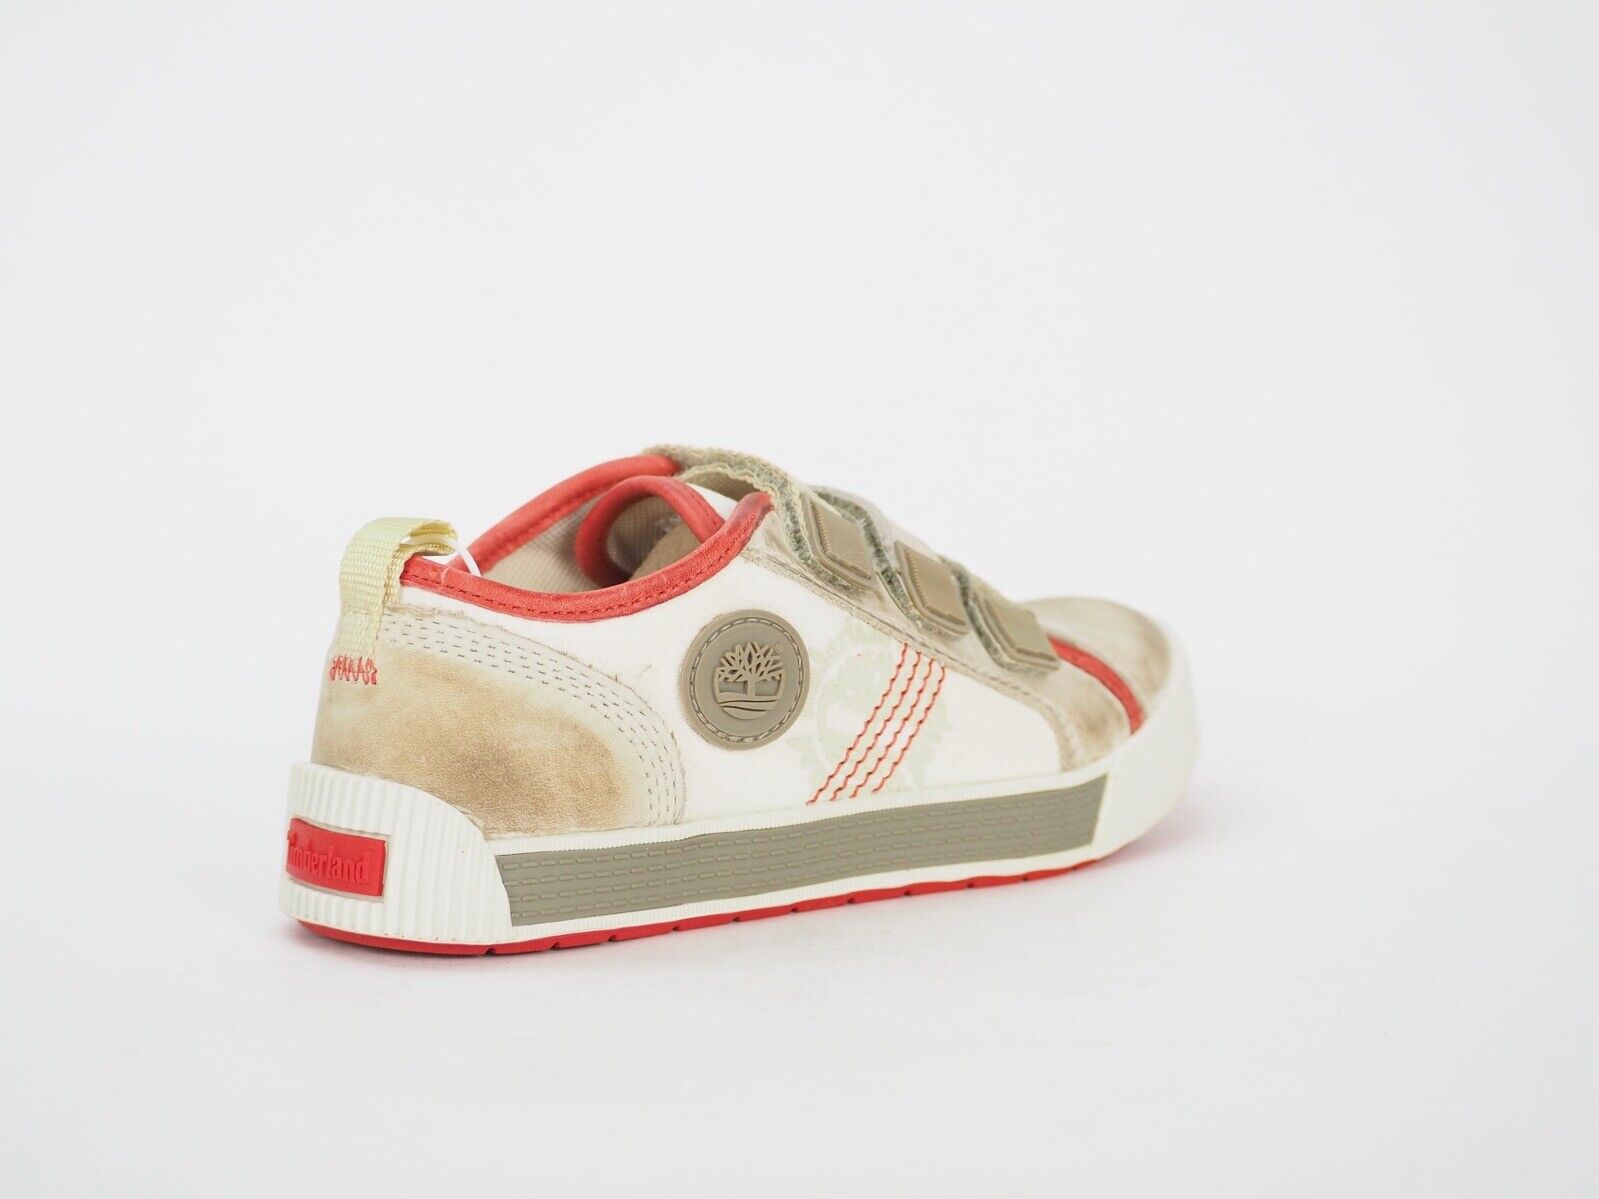 Boys Timberland EK Metro Network 80729 Beige Leather 3 Strap Casual Kids Shoes - London Top Style